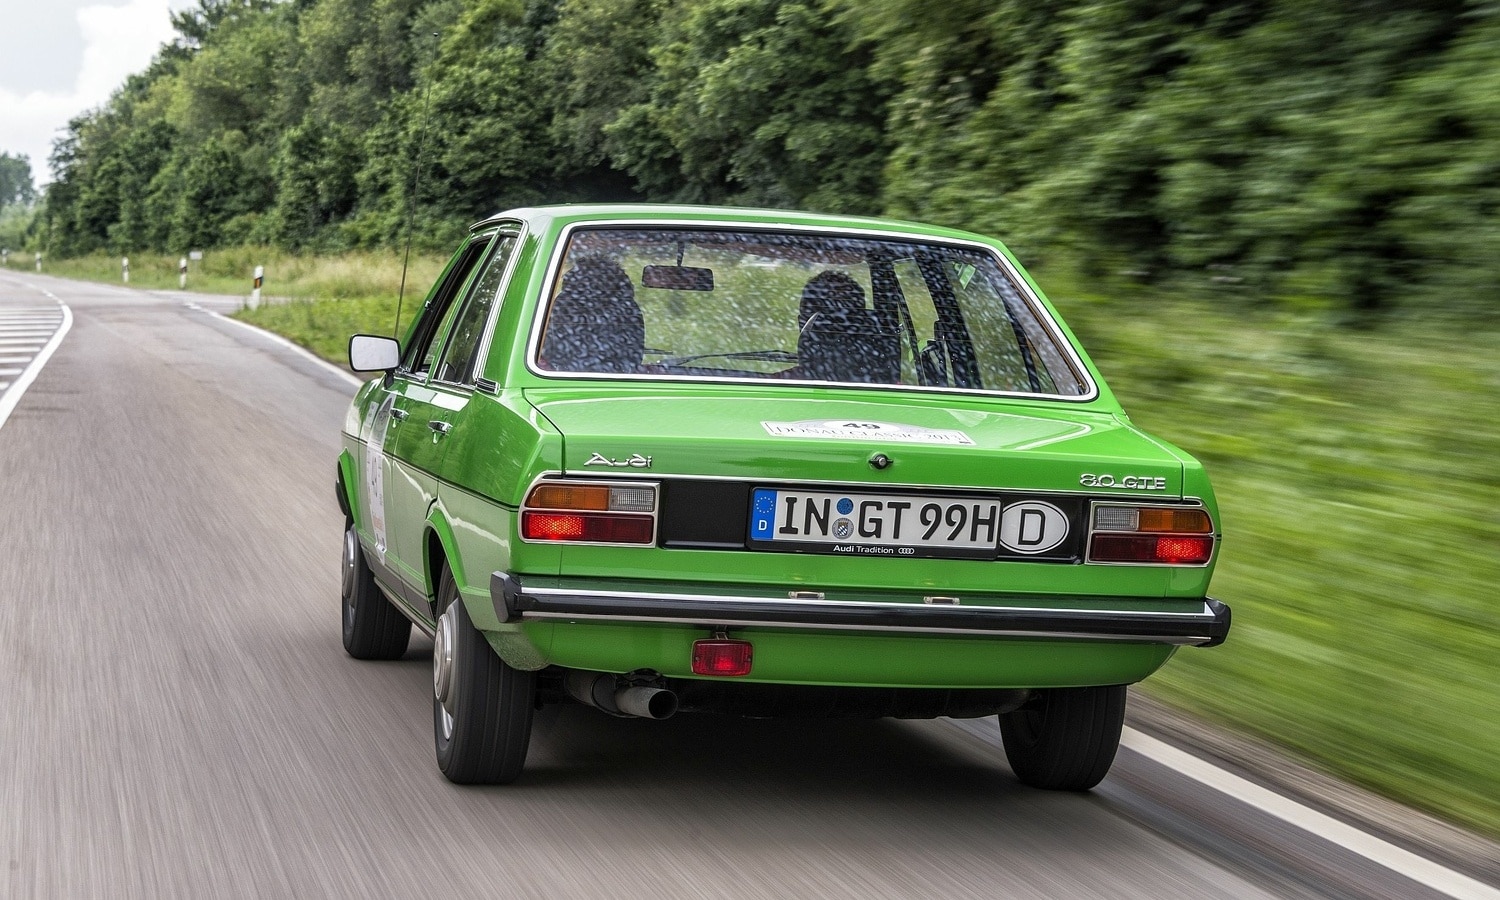 Audi captures the zeitgeist with this car. First Audi 80 unveiled 50 years ago